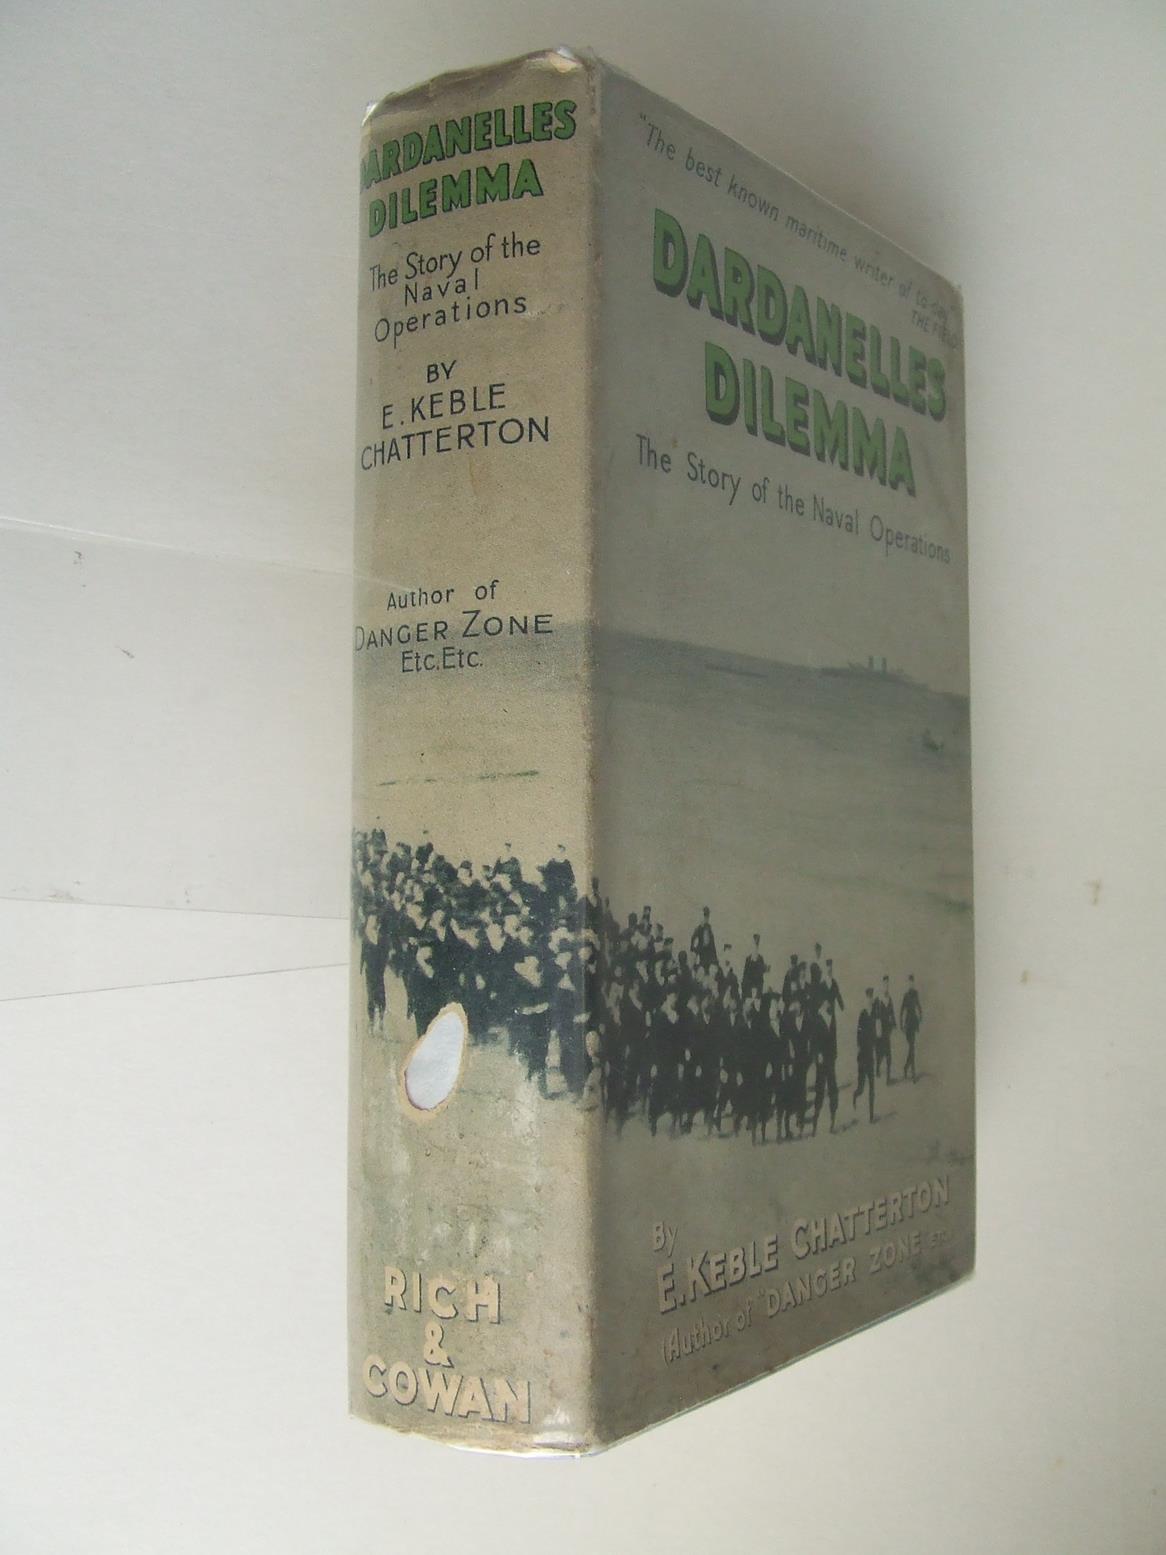 Dardanelles Dilemma, the story of the naval operations